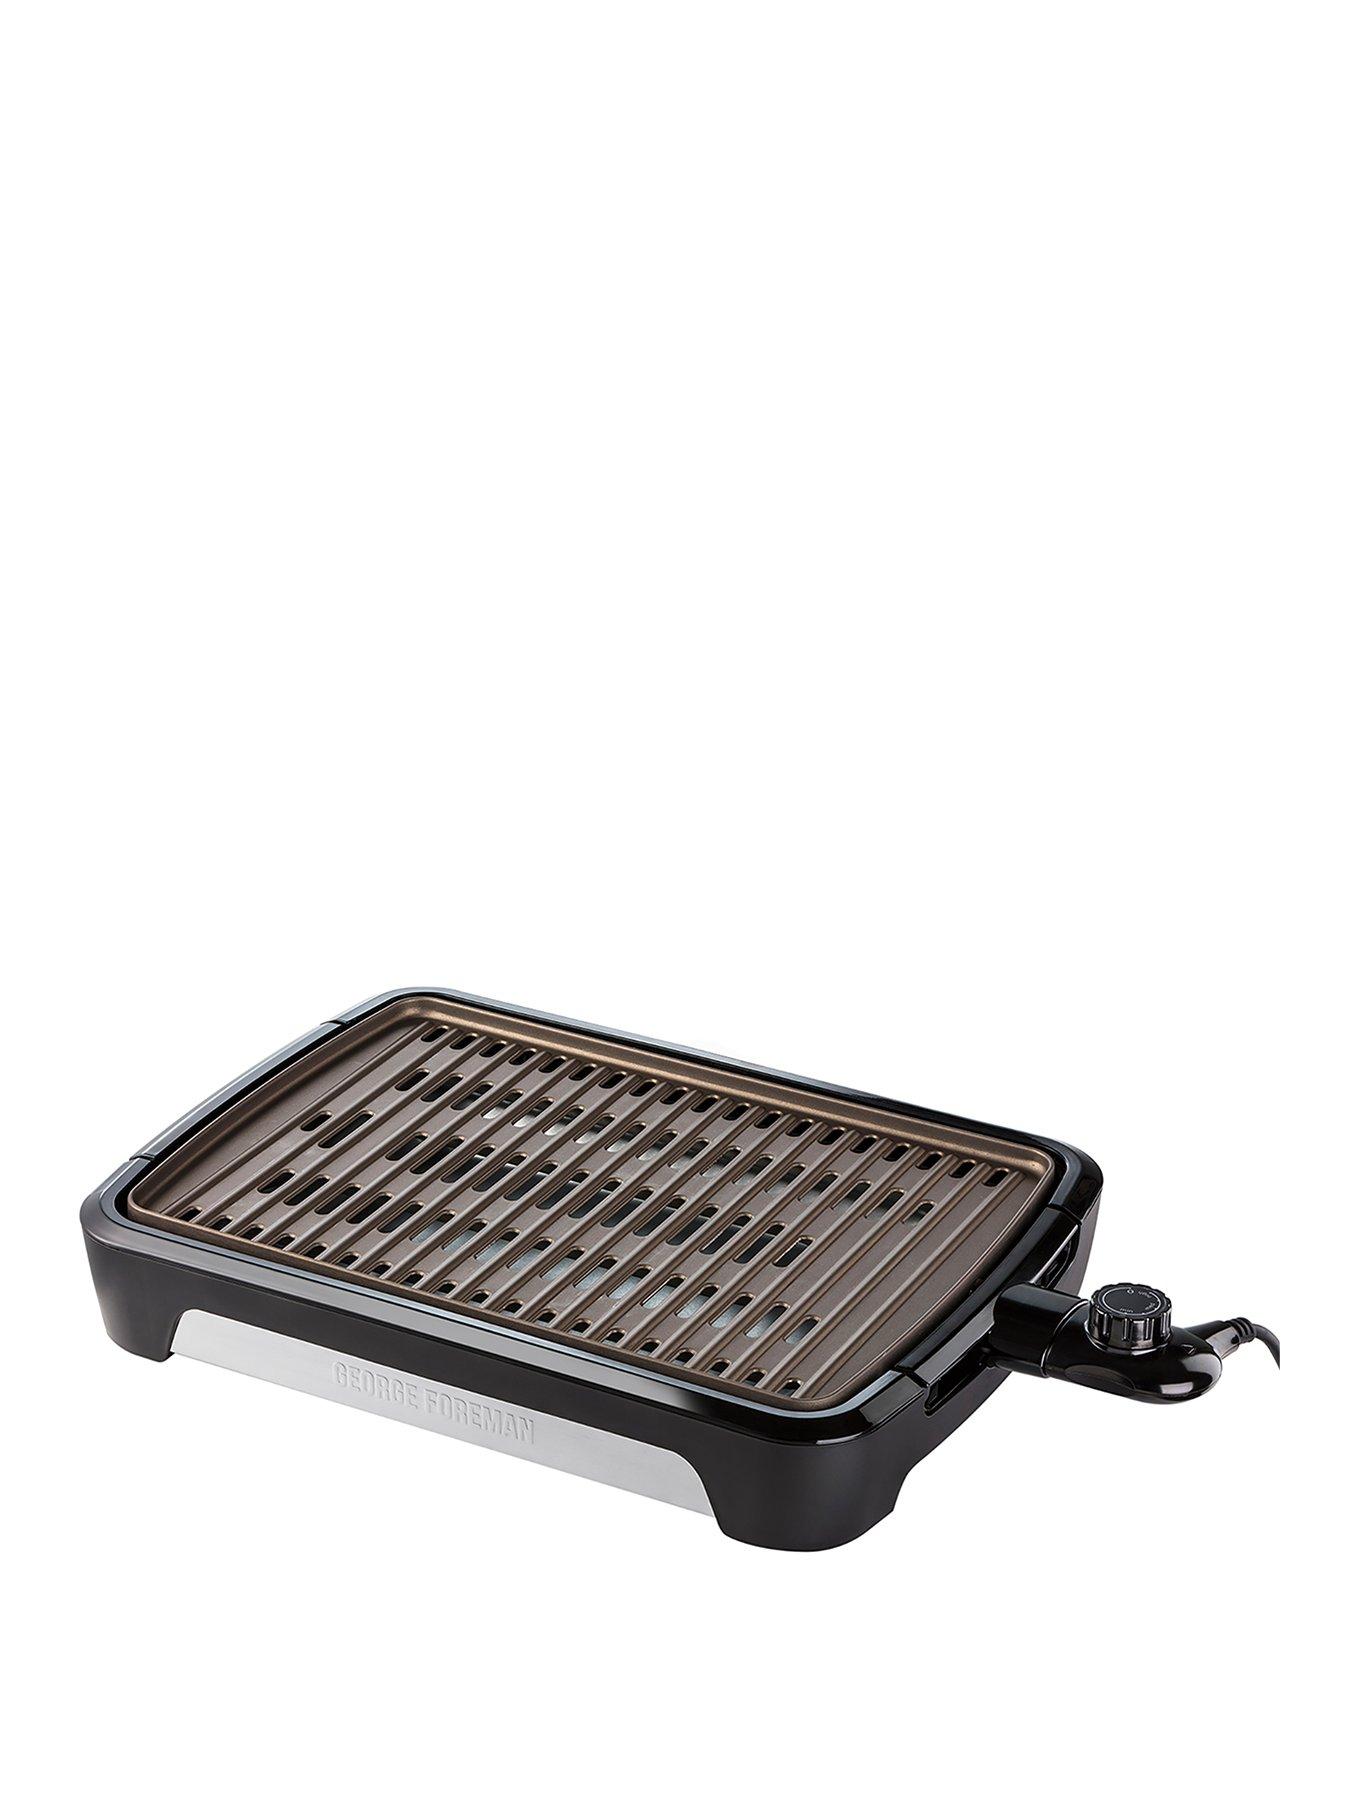 George Foreman Large Smokeless Indoor BBQ Grill - 25850 | very.co.uk